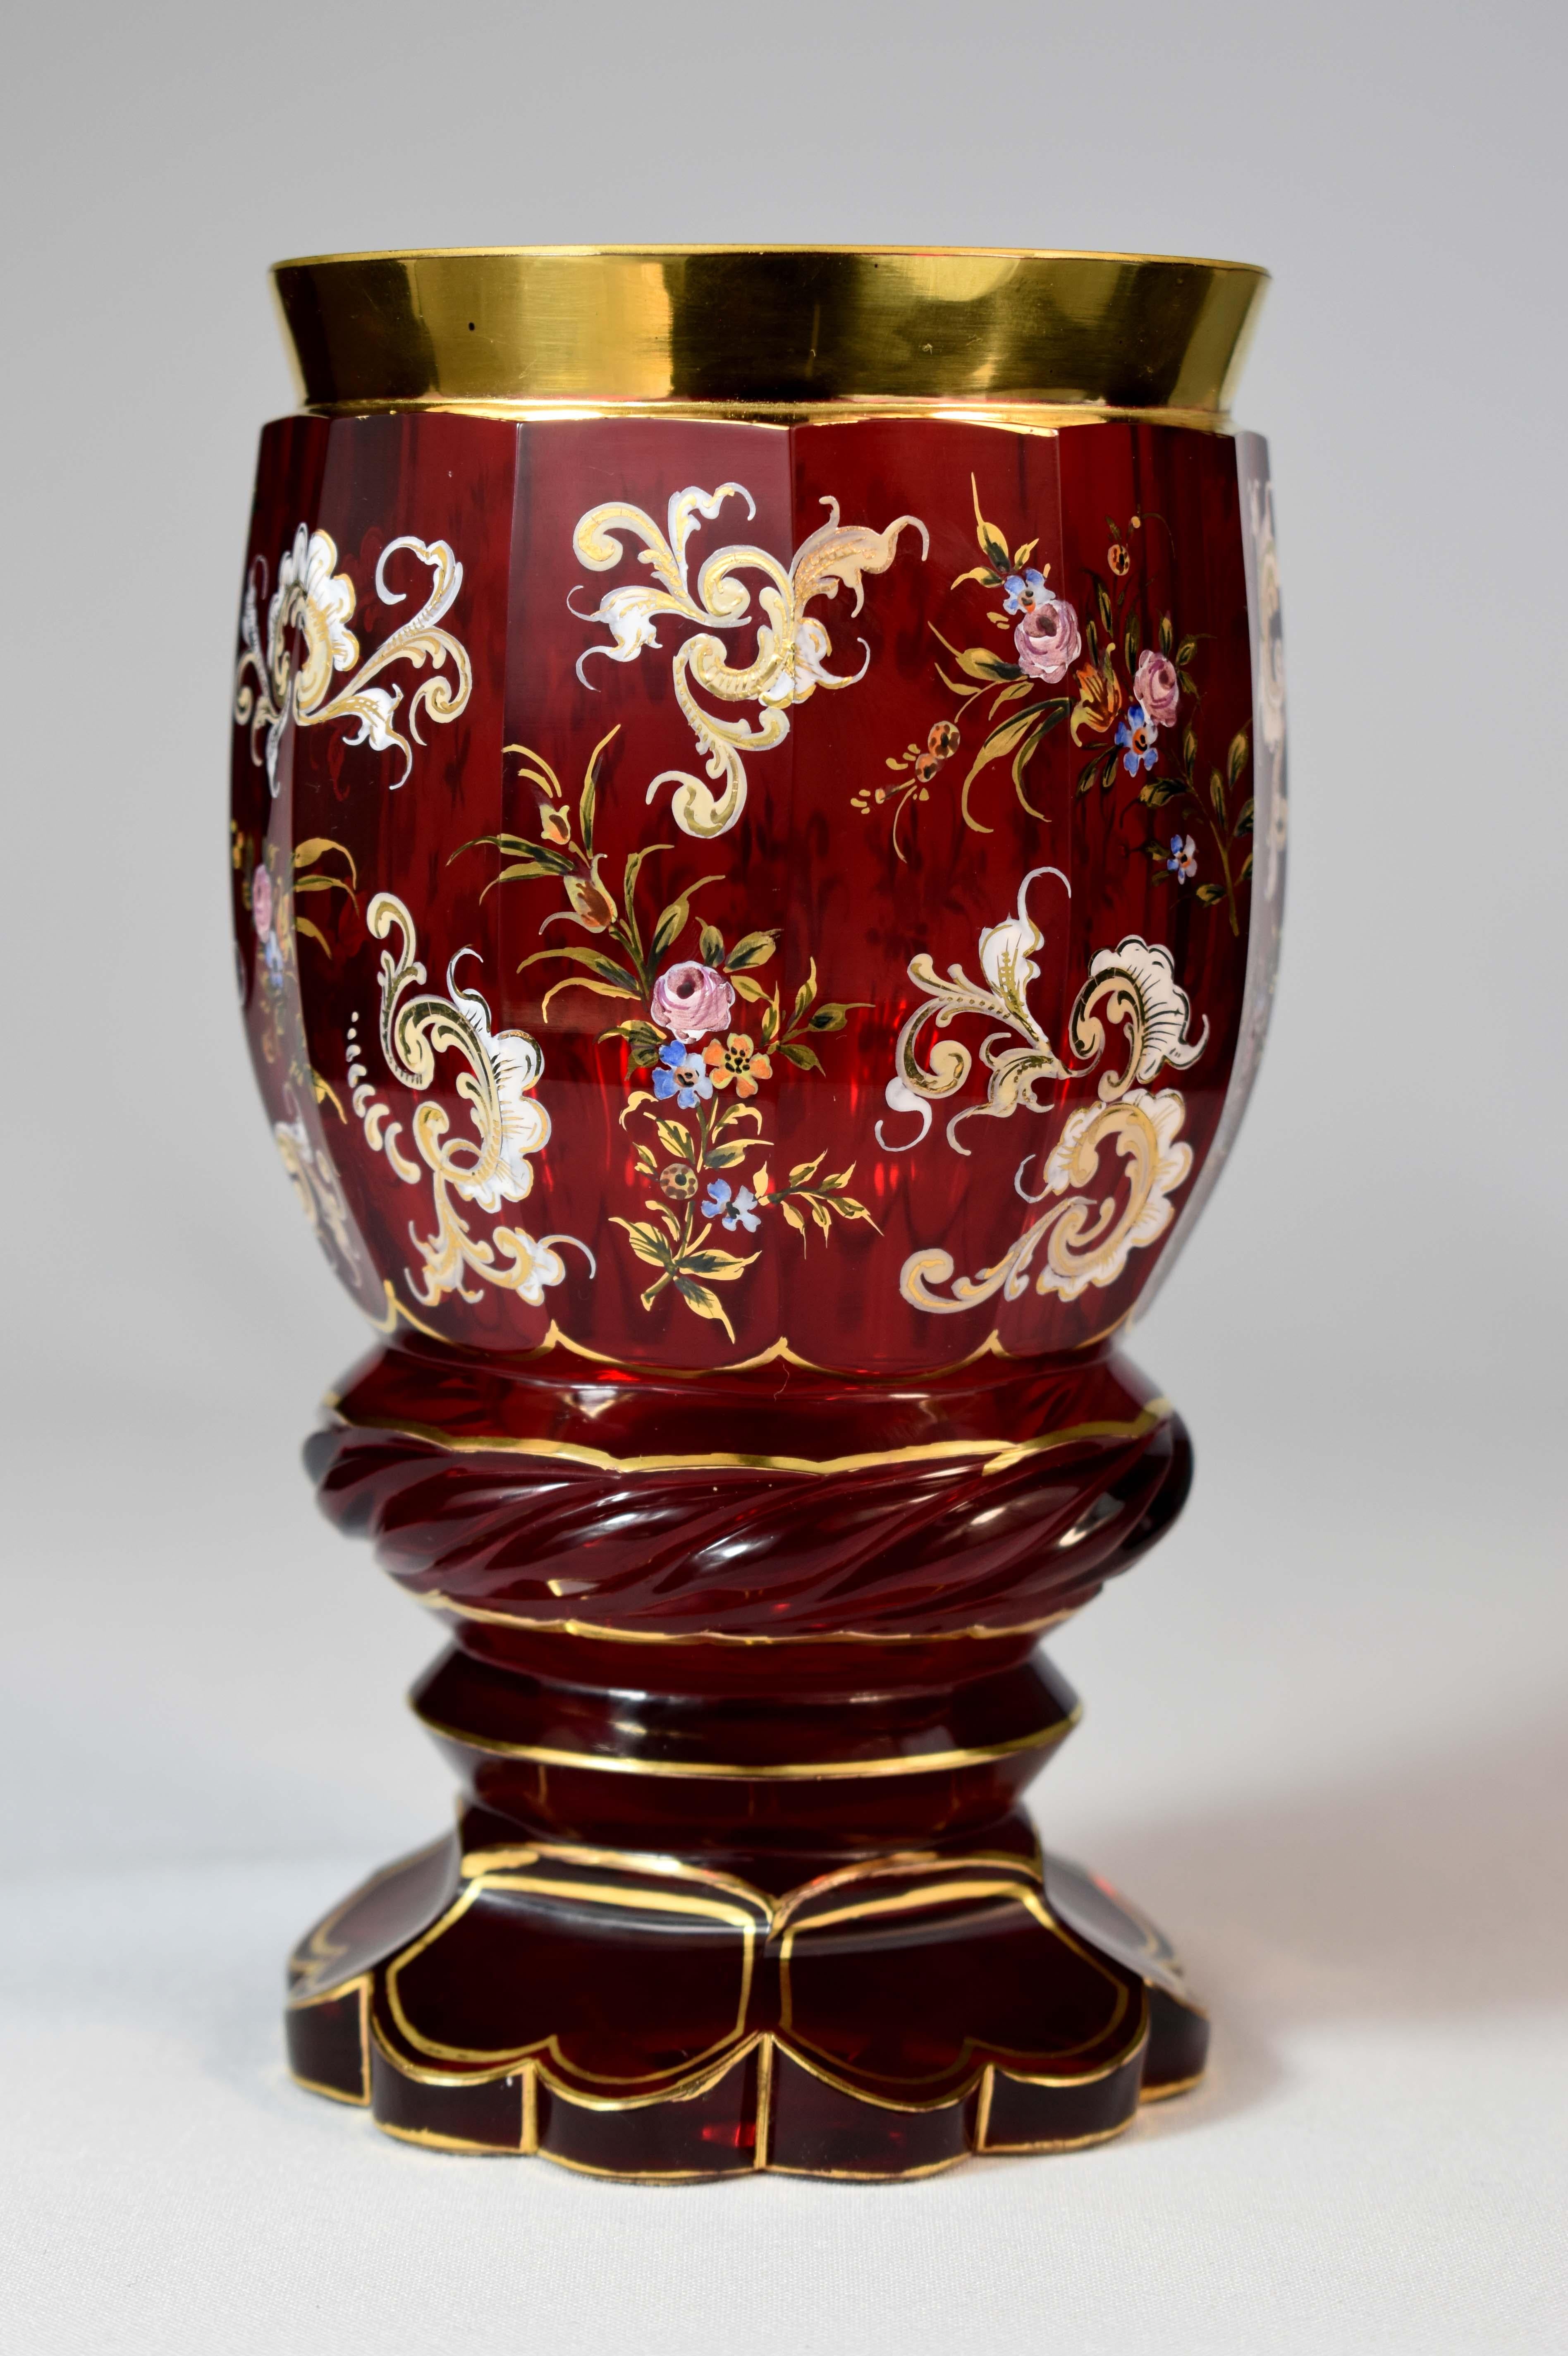 Ruby hand blown goblet in the style of the 19th century, is made in the glass studio Šuda in northern Bohemia, where the restoration of historic glass is also carried out. Northern Bohemia is historically one of the most important areas of old glass